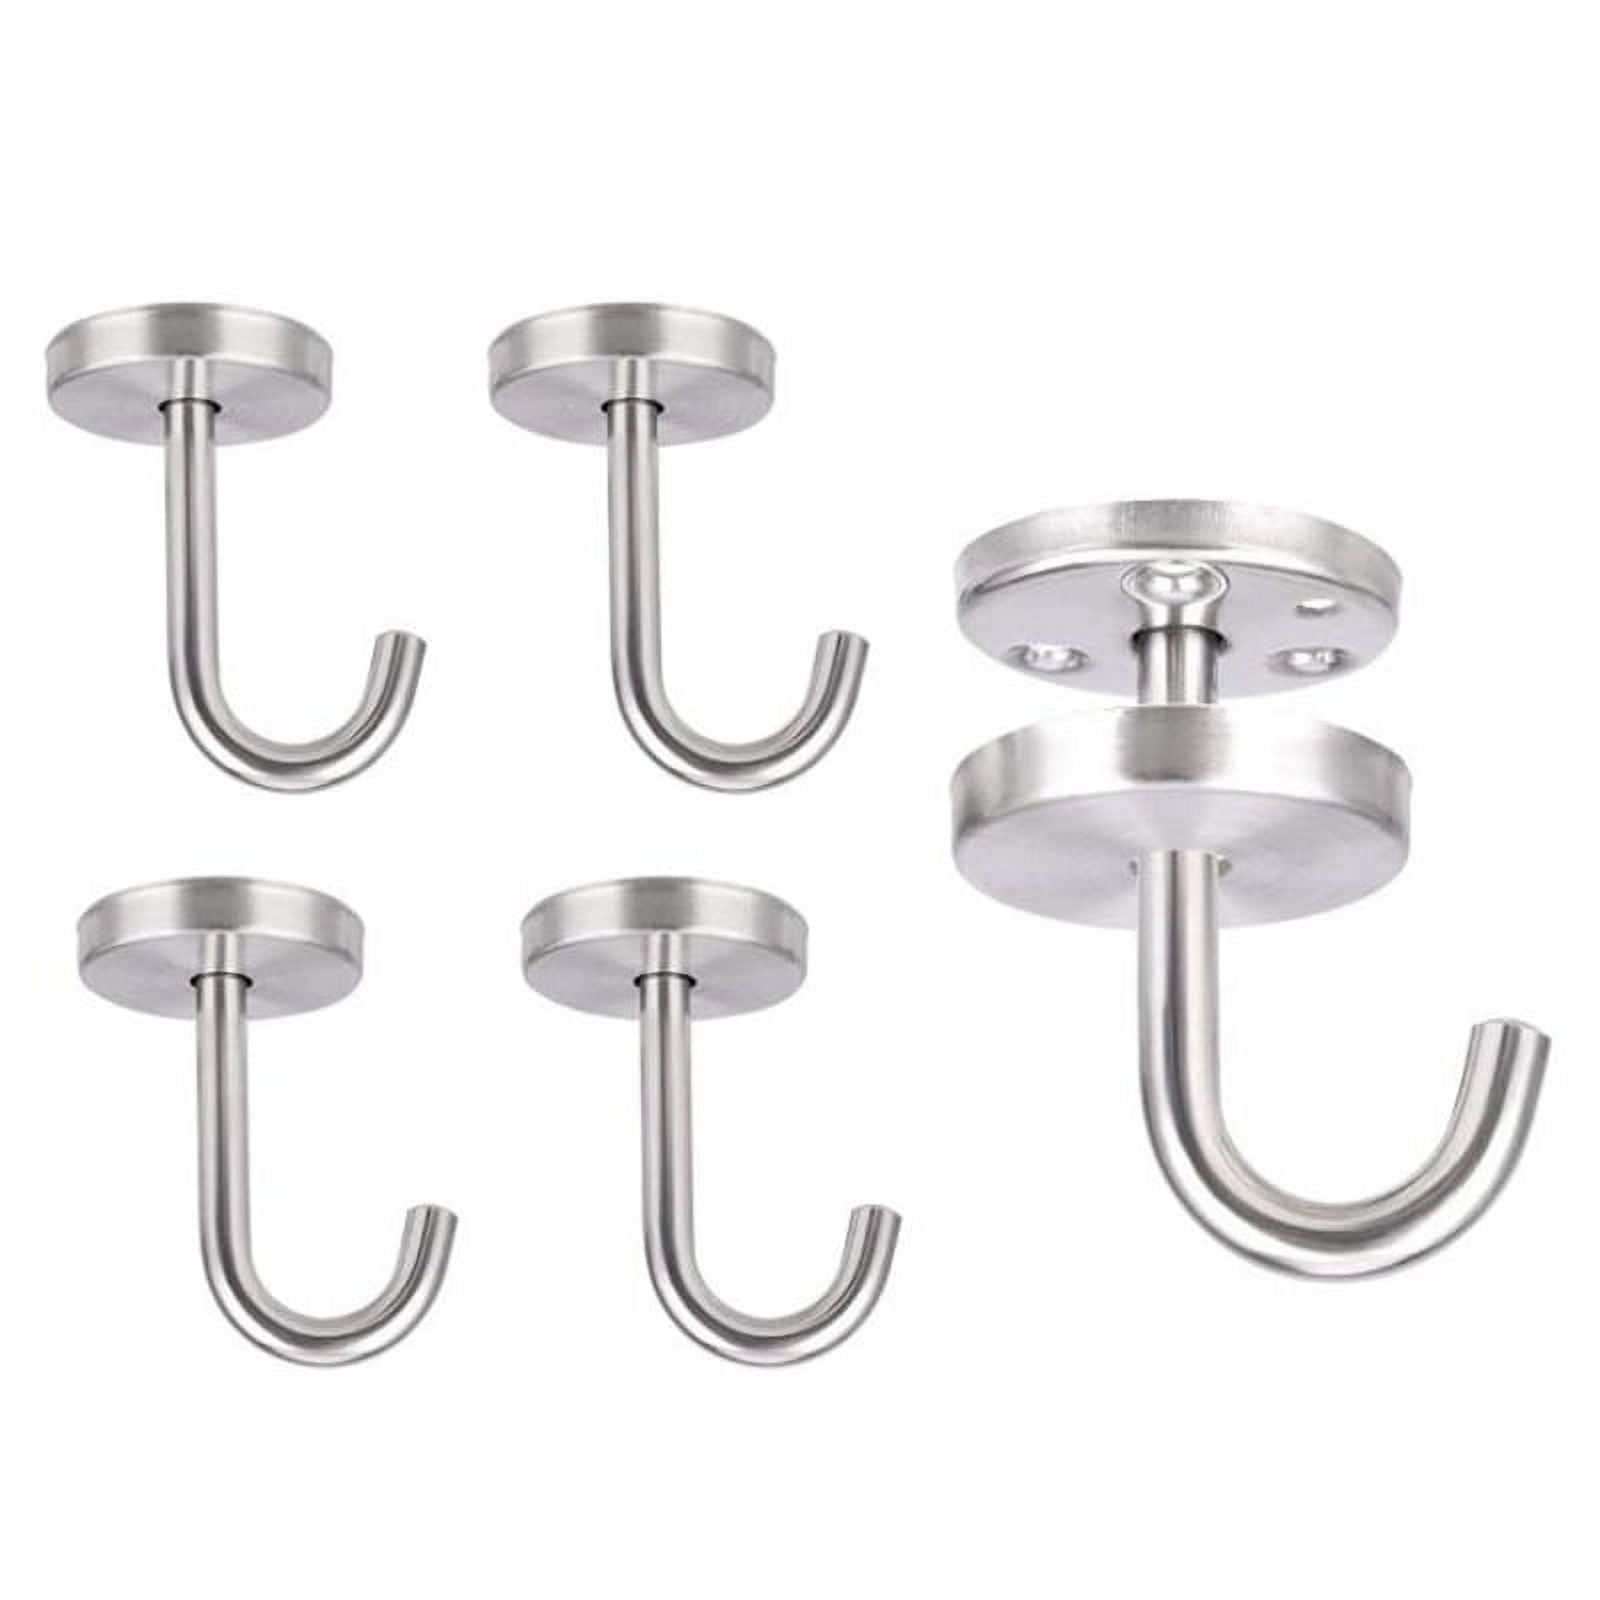 5 Pcs Stainless Steel Ceiling Hook Round Base Top Mount